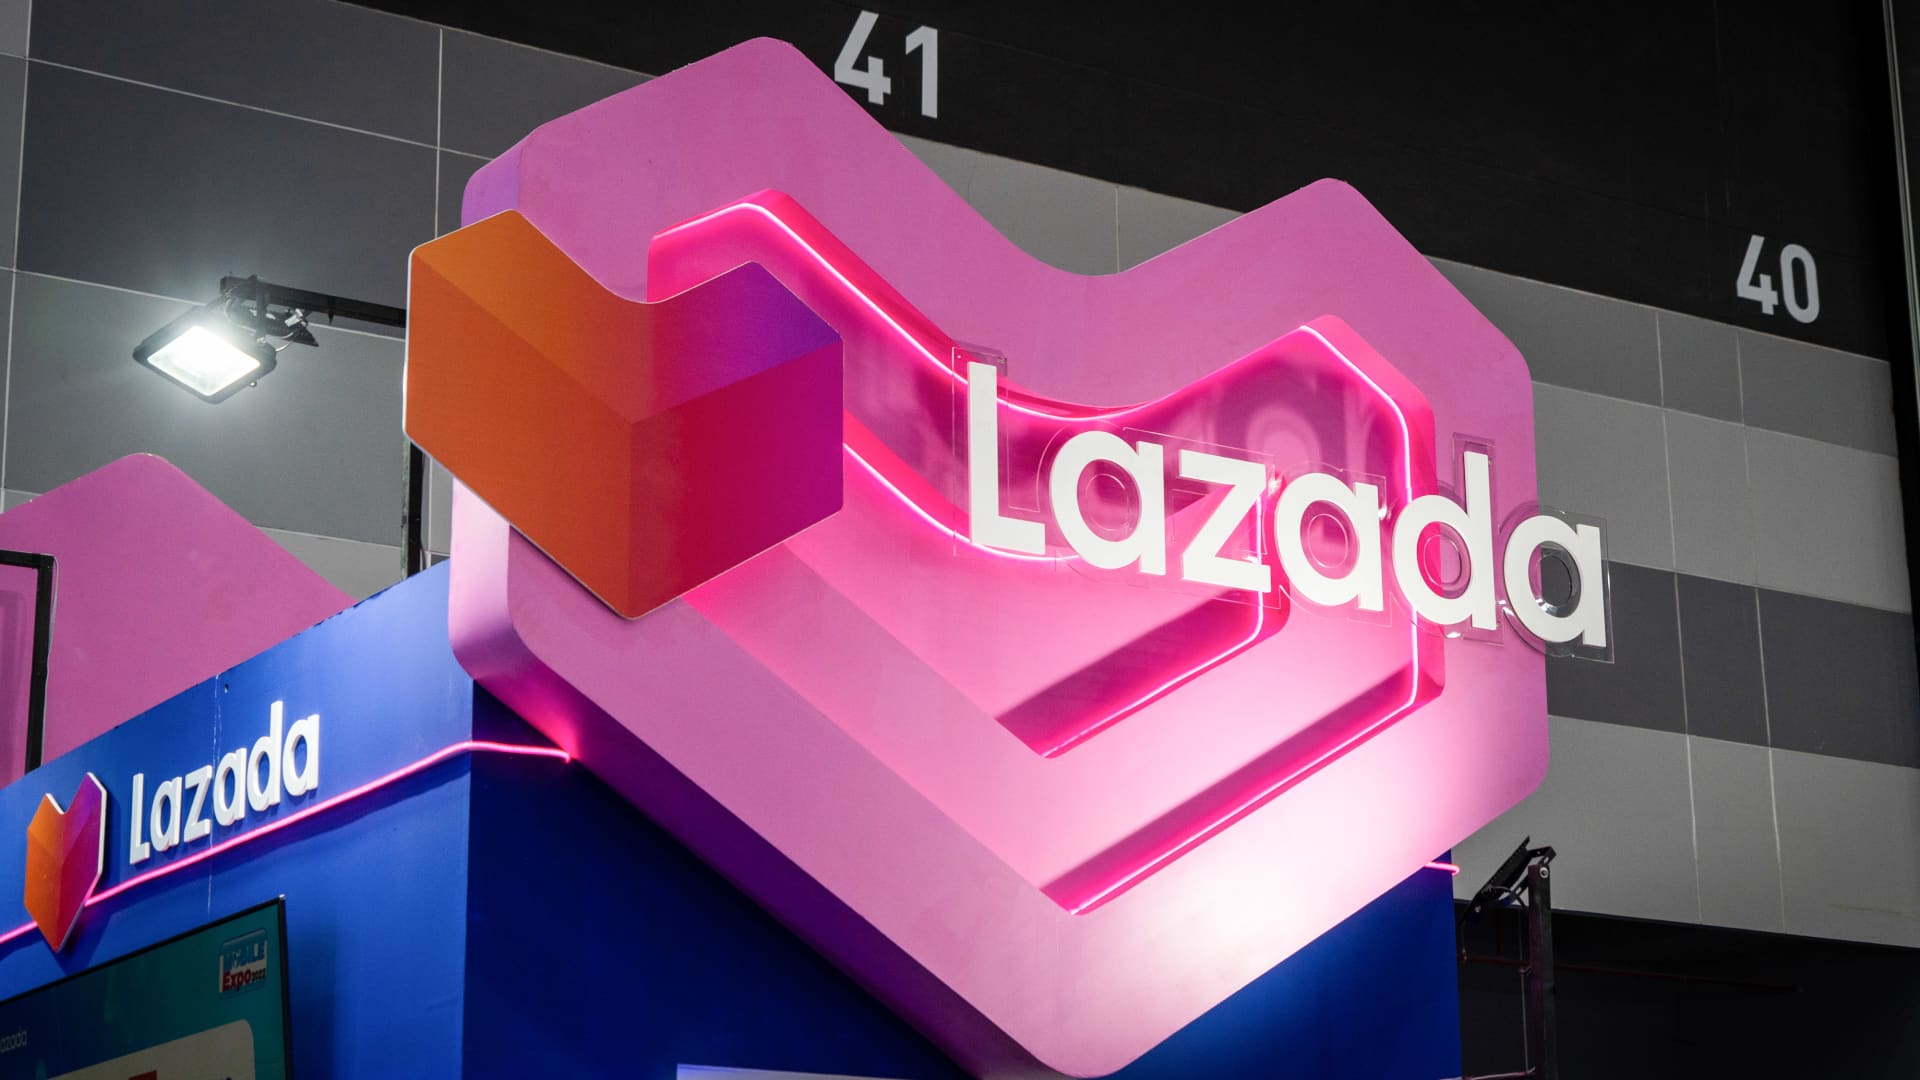 Alibaba's Lazada cuts staff across Southeast Asia in fresh round of layoffs